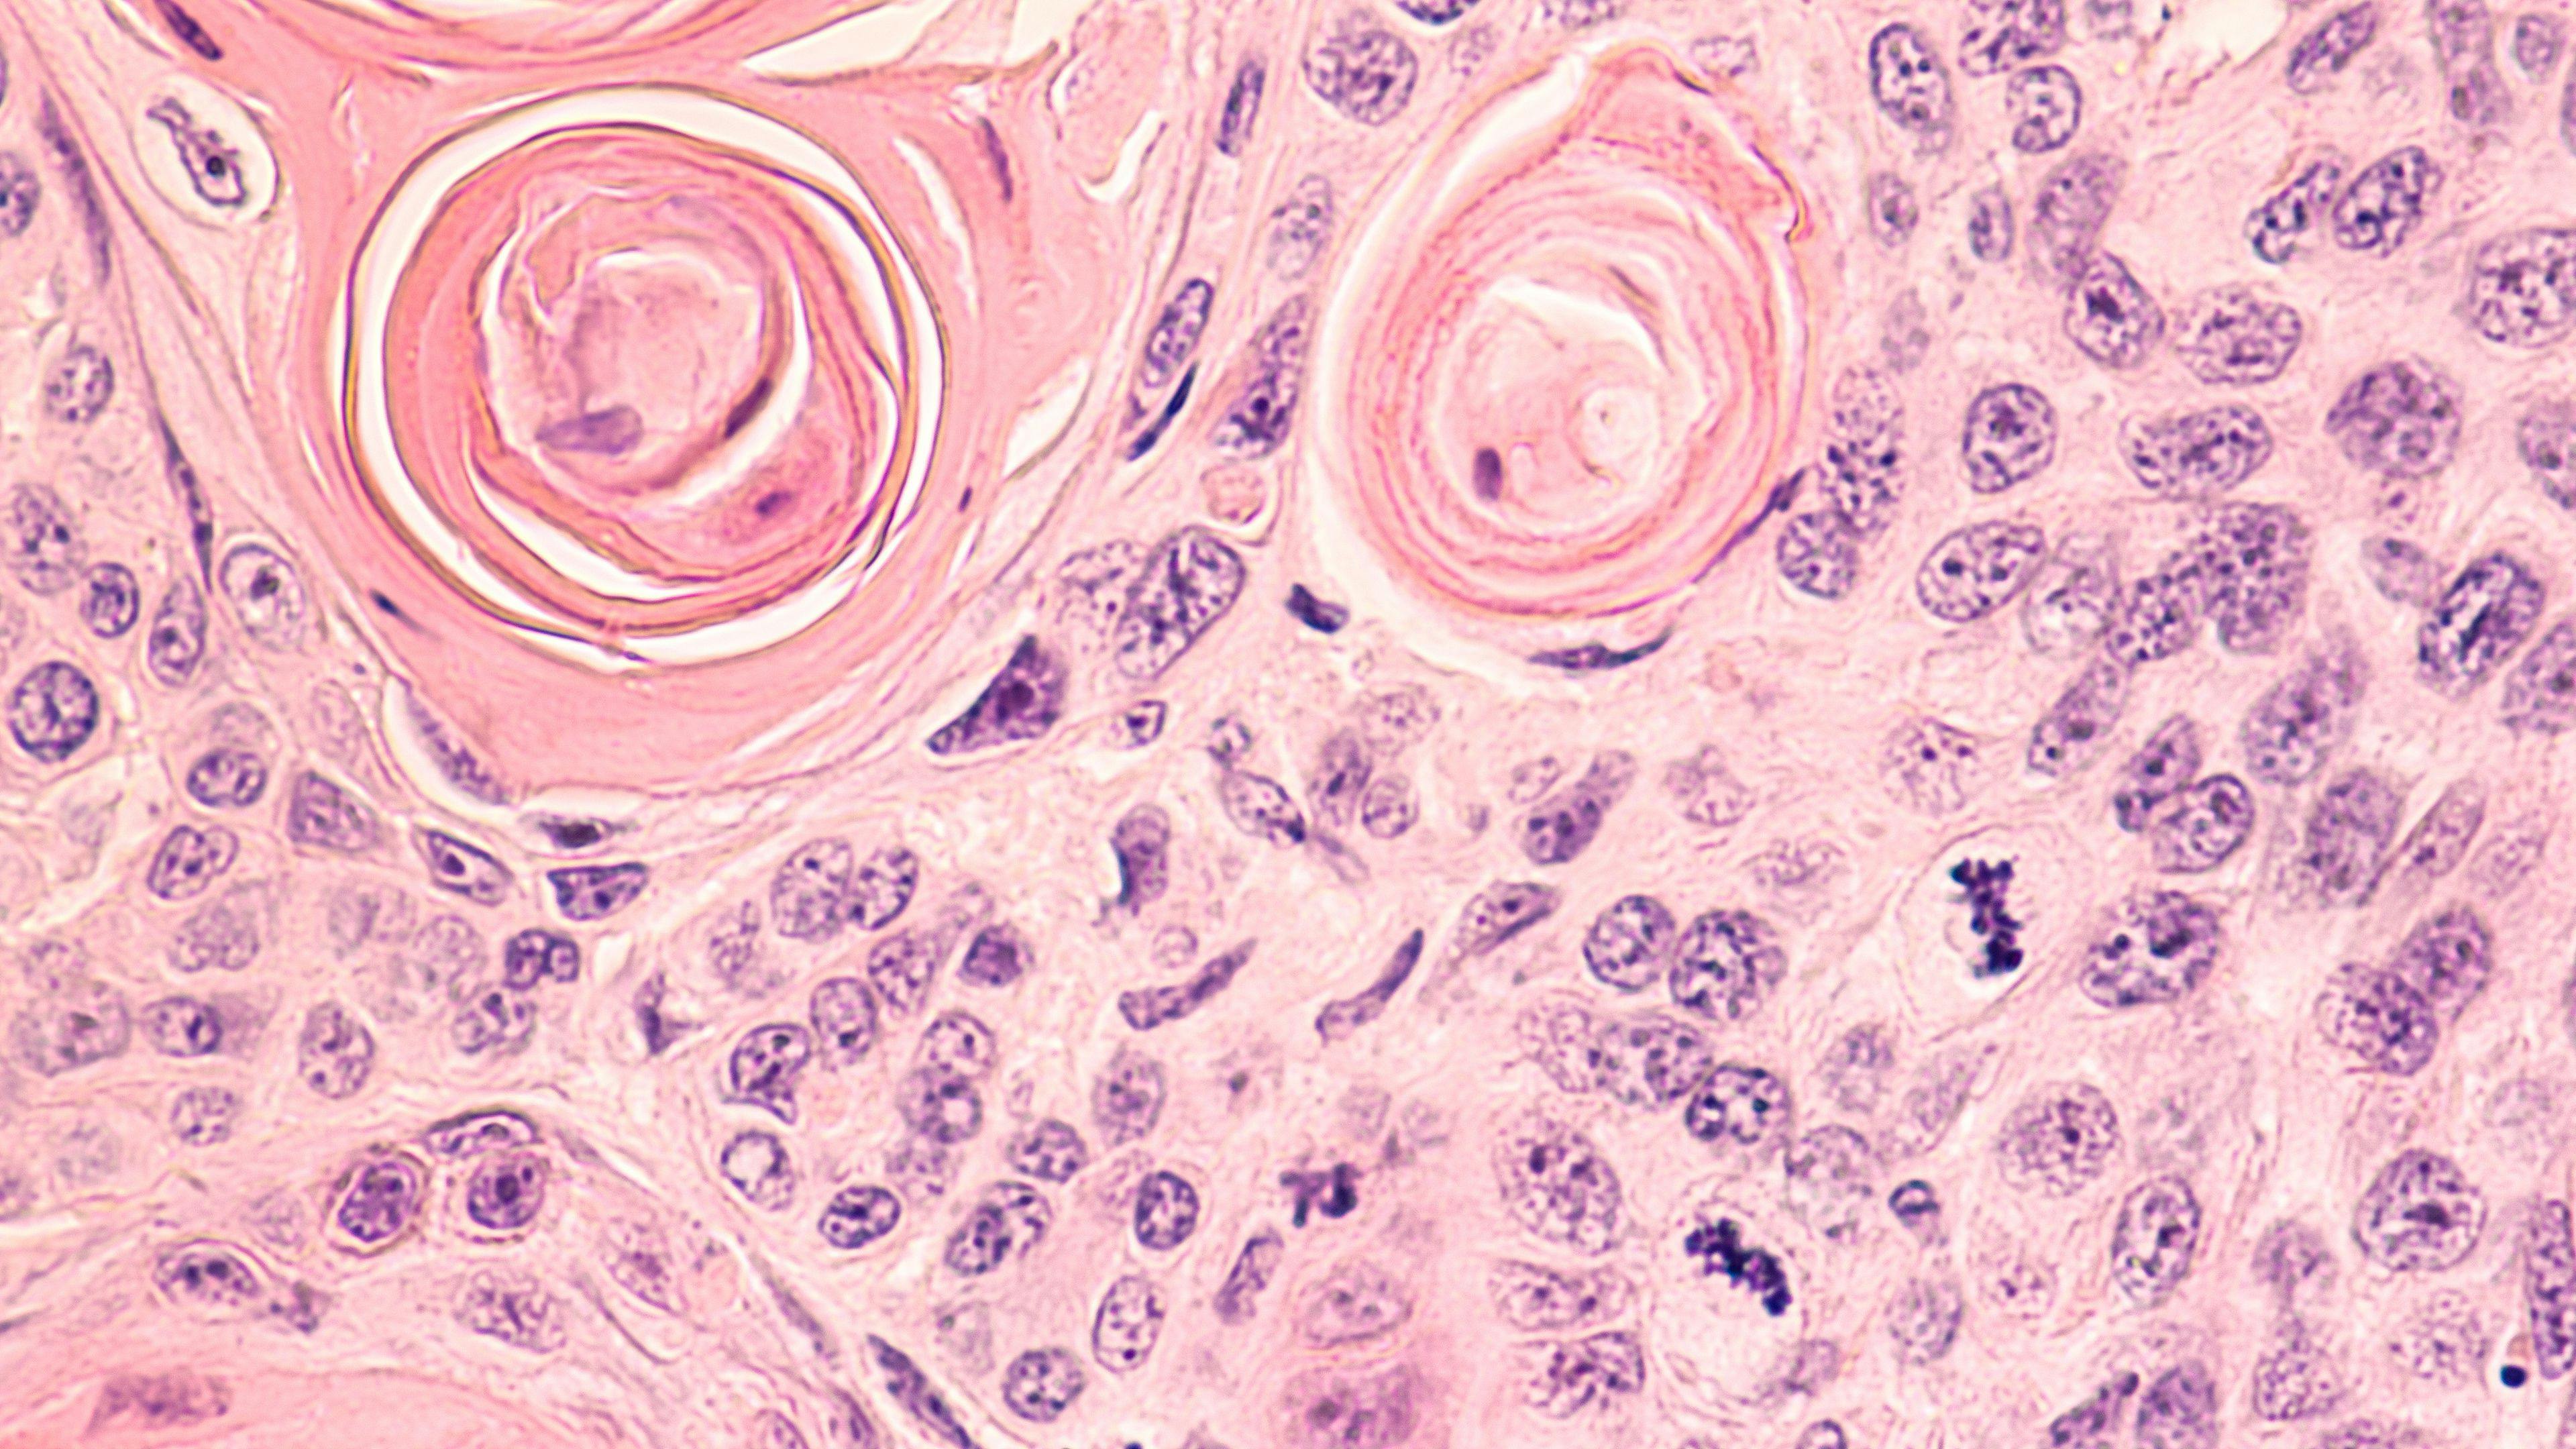 Lung Cancer: Photomicrograph of a CT (CAT) scan-guided needle core biopsy showing pulmonary squamous cell carcinoma, a type of non-small cell carcinoma usually associated with ... See More | Image Credit: © David A. Litman -www.stock.adobe.com